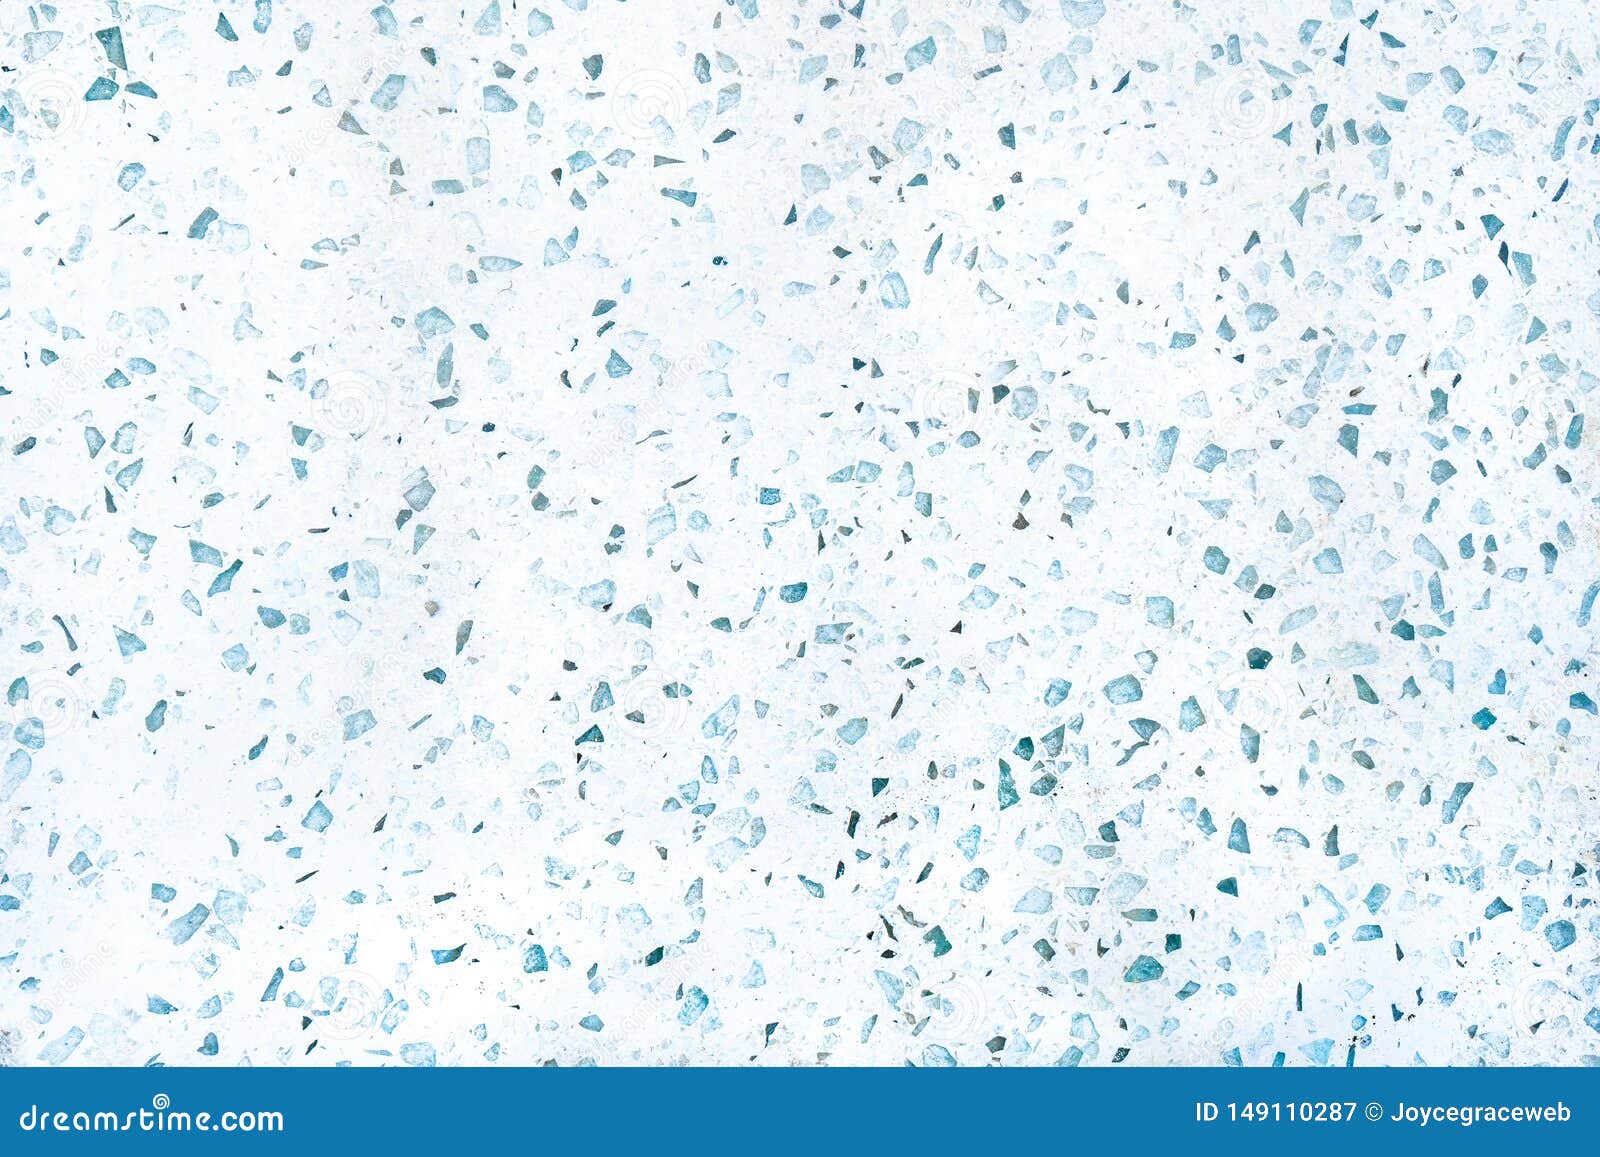 speckled quartz countertop material as a background, flat surface, in blue and white colors